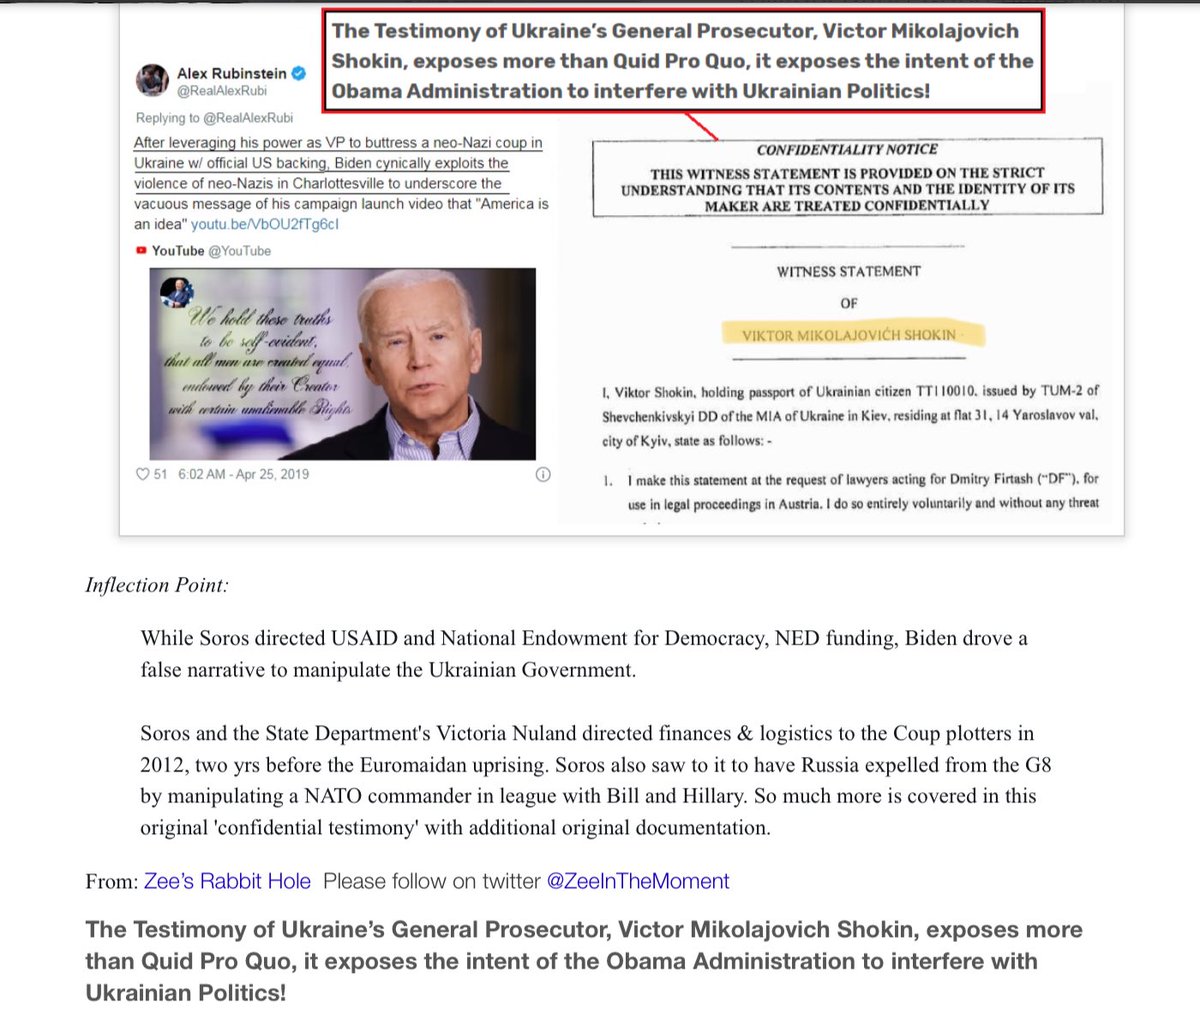 “While Soros directed USAID and National Endowment for Democracy, NED funding, Biden drove a false narrative to manipulate the Ukrainian Government.Soros and the State Department's Victoria Nuland directed finances & logistics to the Coup plotters in 2012...  https://twitter.com/dmills3710/status/1184651359435591680